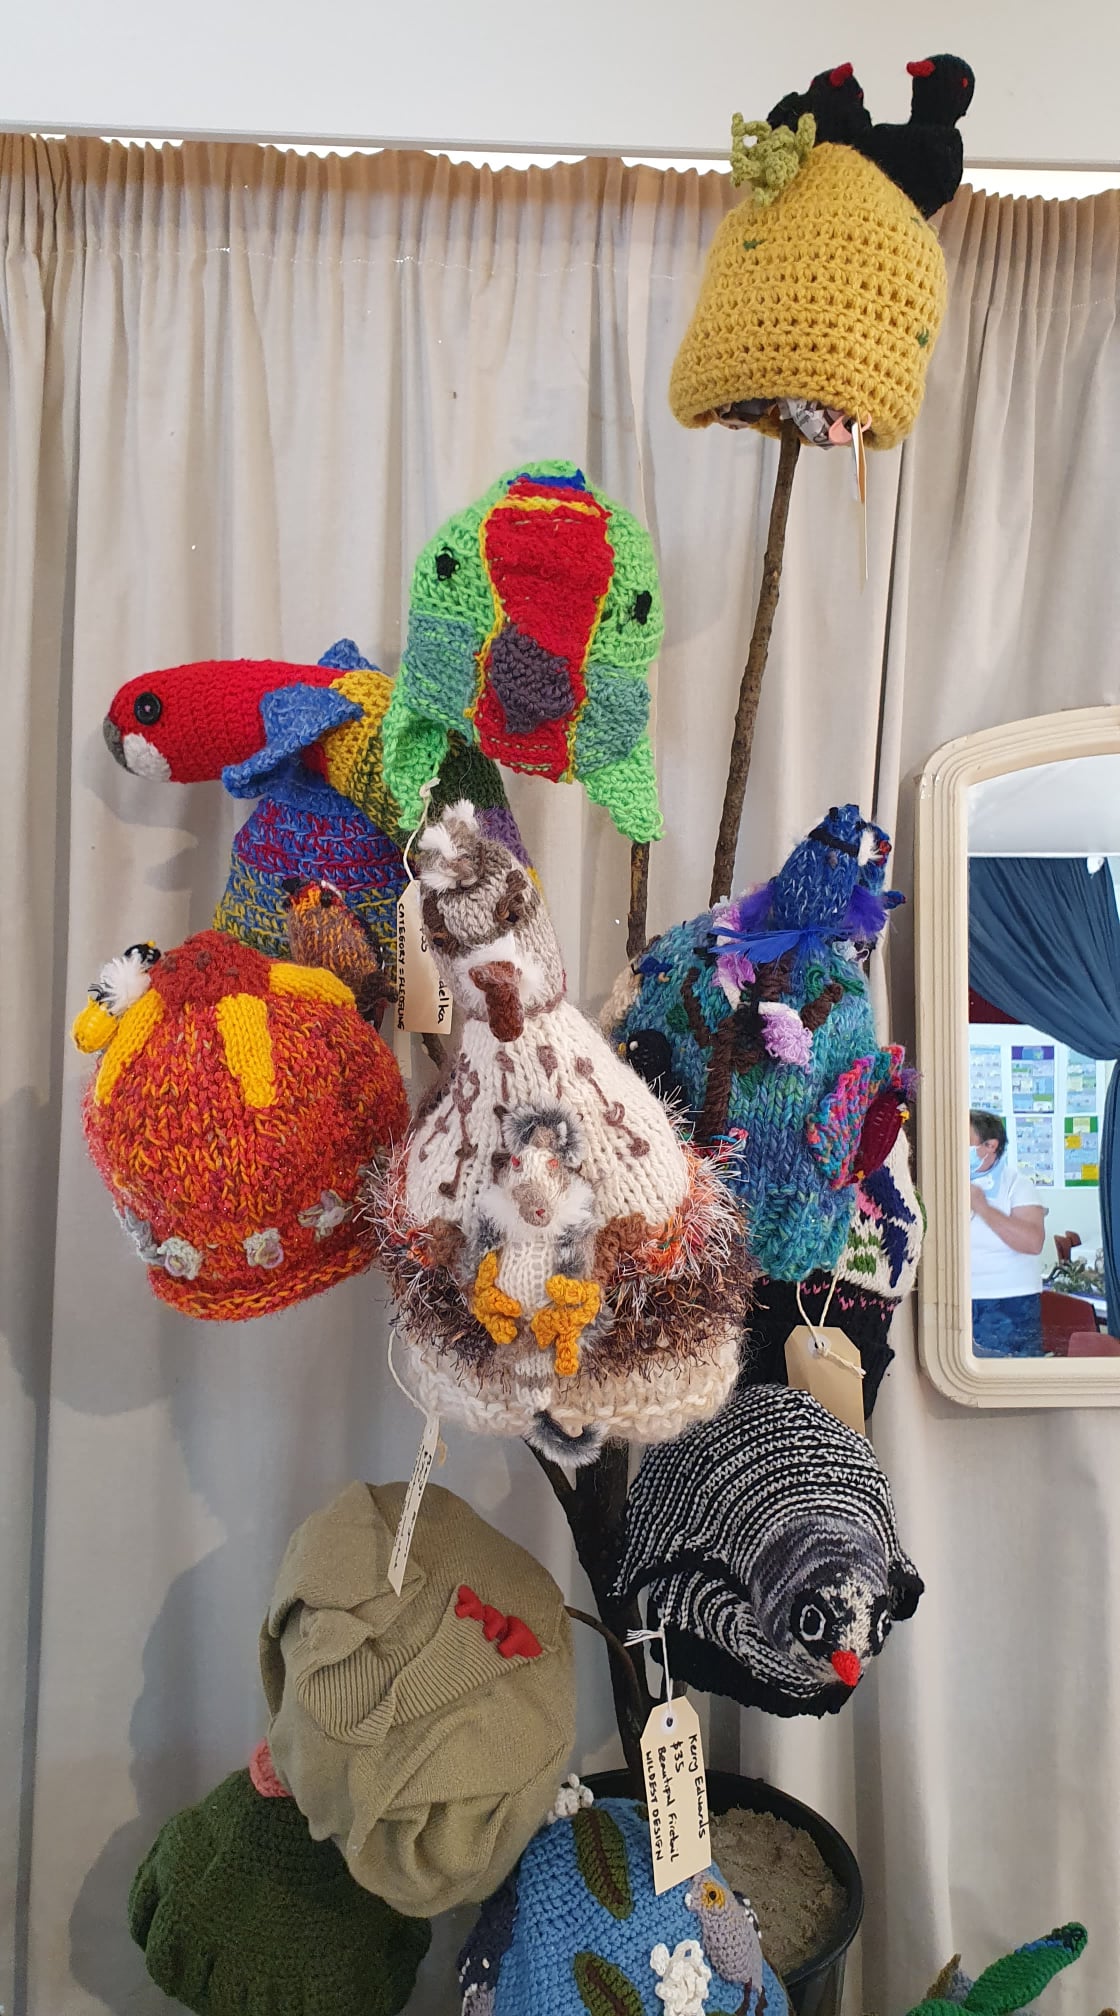 Bird Beanie competition at the Bruny Island Bird festival Profile story with Art Trails Tasmania